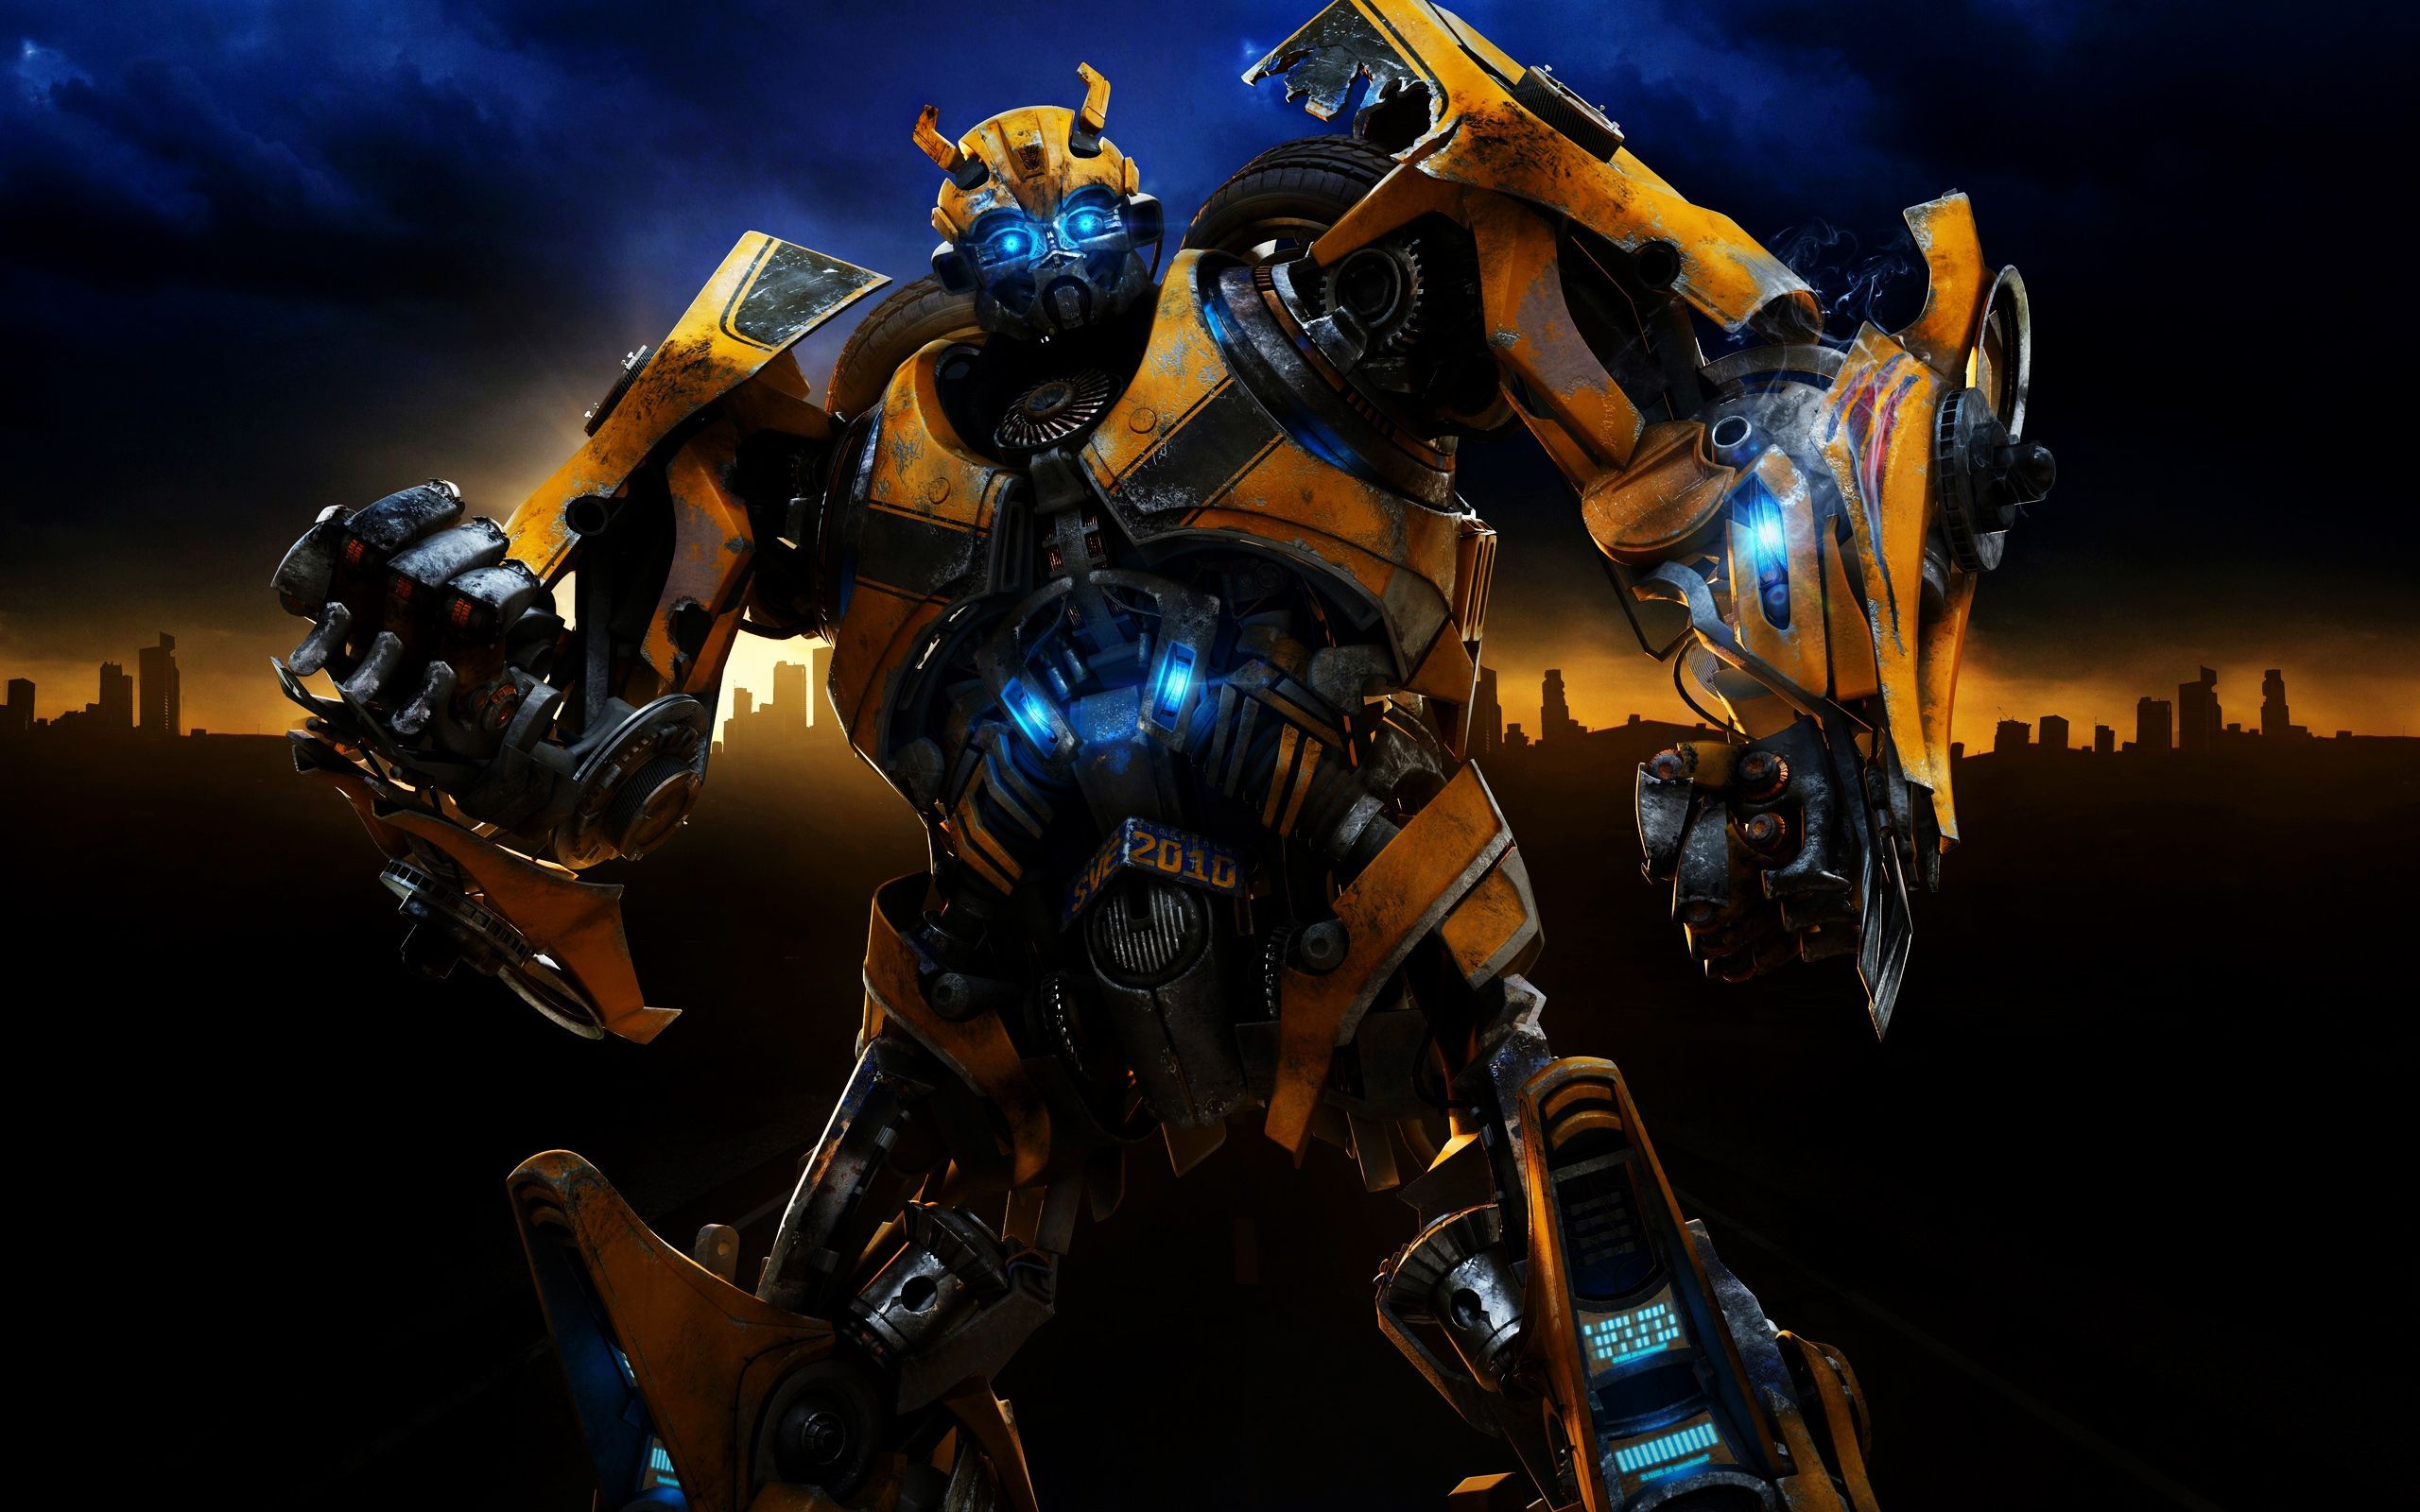 HD Wallpaper Of Bumblebee Autobot In Transformers Movie